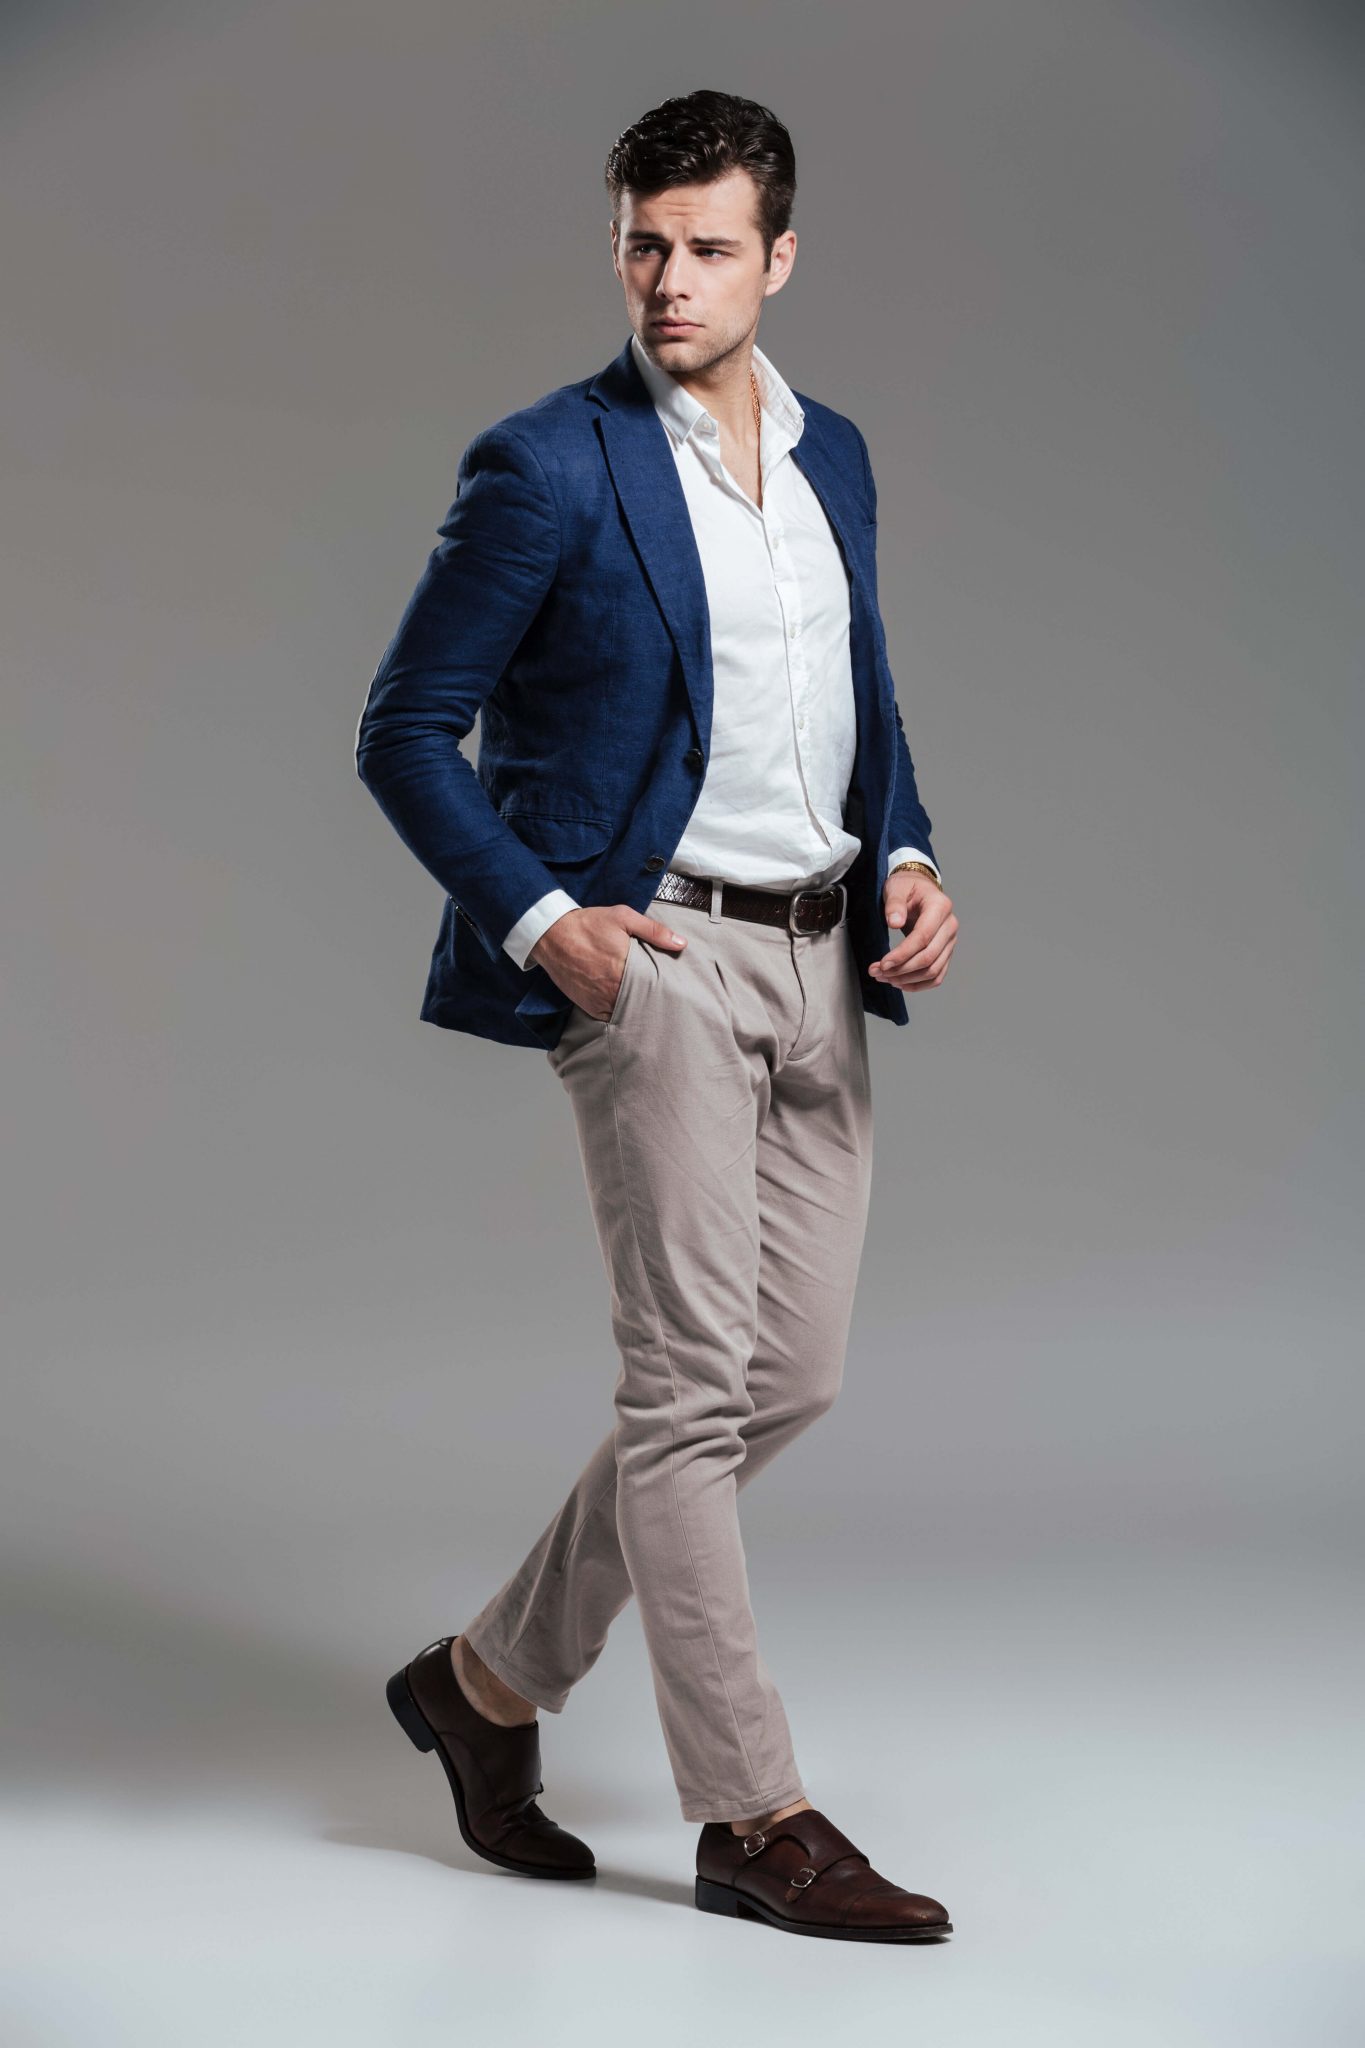 The 6 Best Shirts To Wear With Khaki Pants - MENnStuff